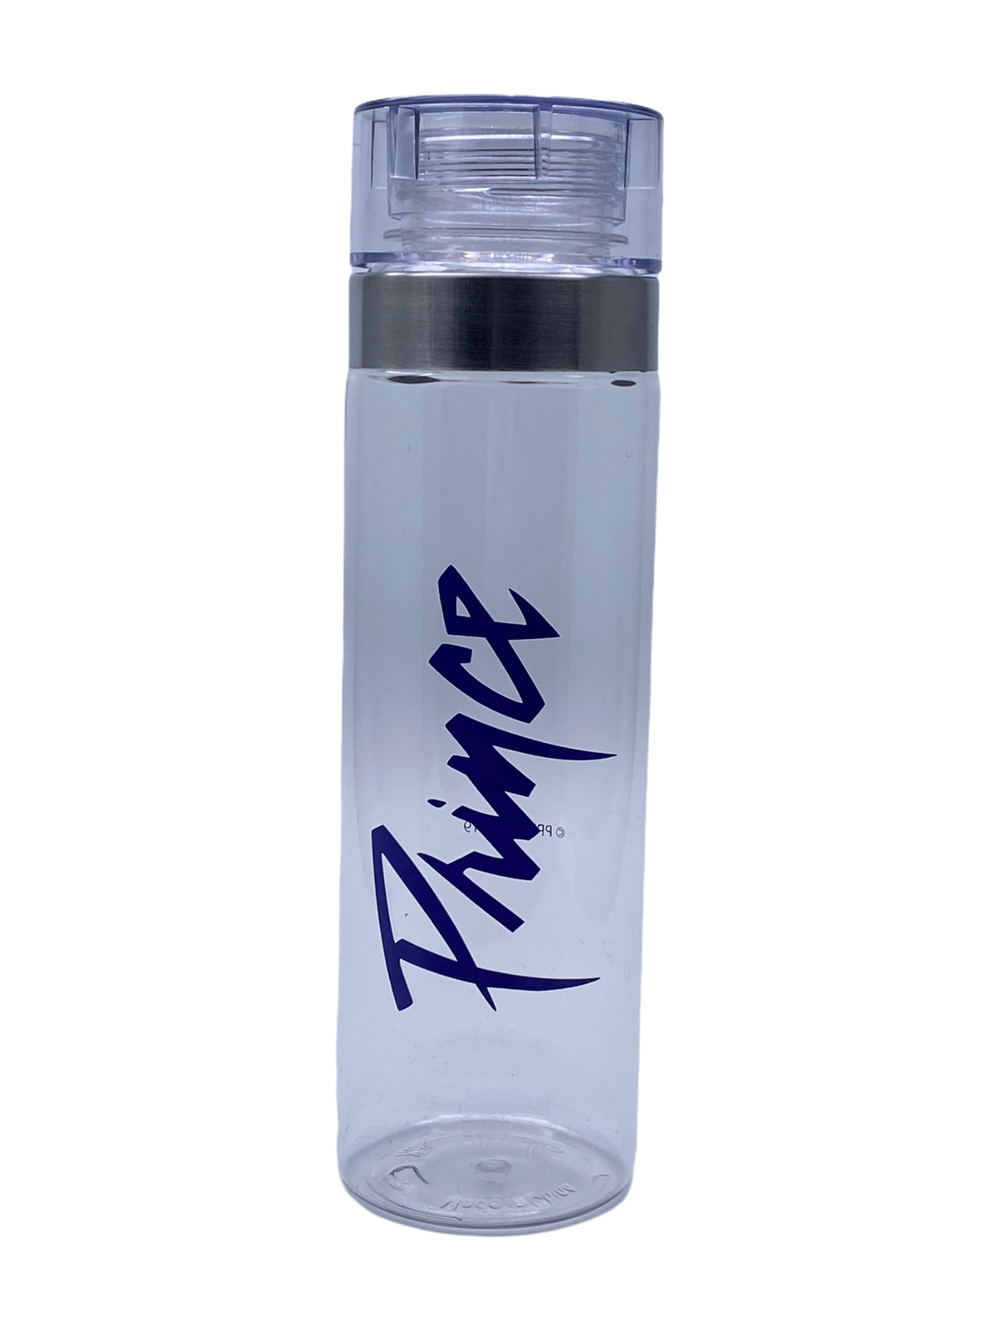 Prince – Official Drinks Bottle Clear Plastic BPA Free PRINCE Brand New